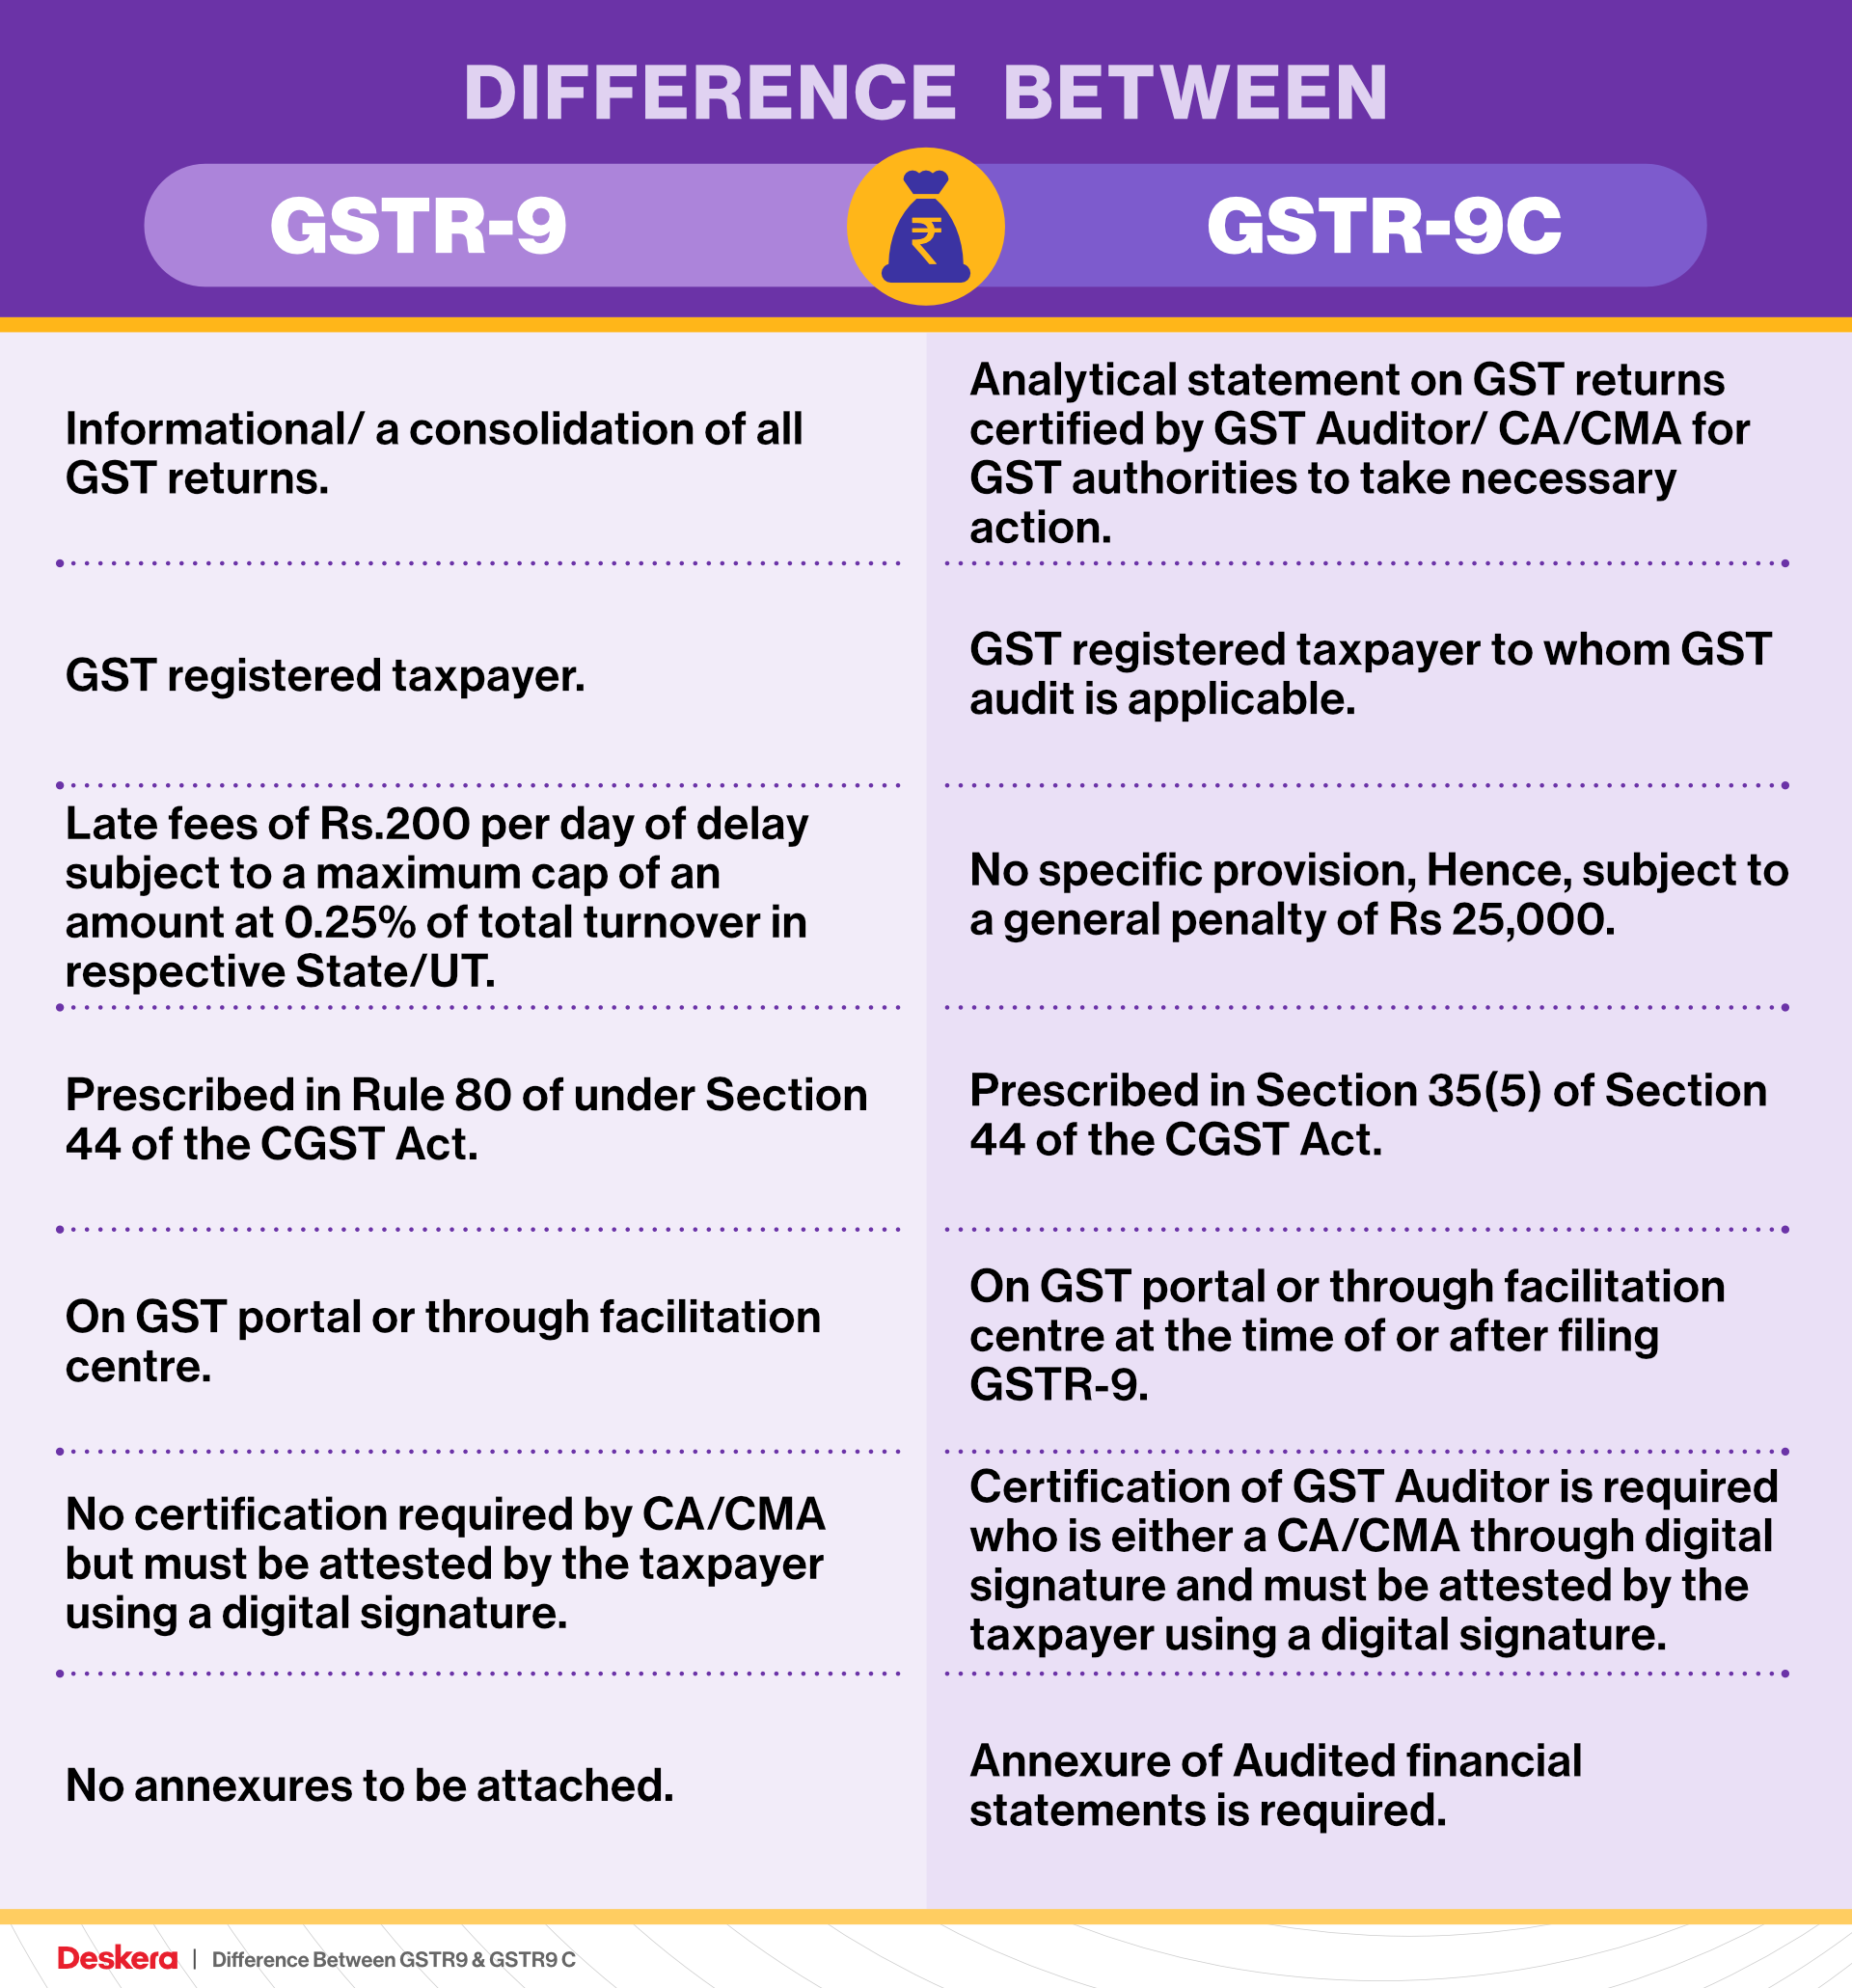 Difference between GSTR-9 and GSTR 9 C